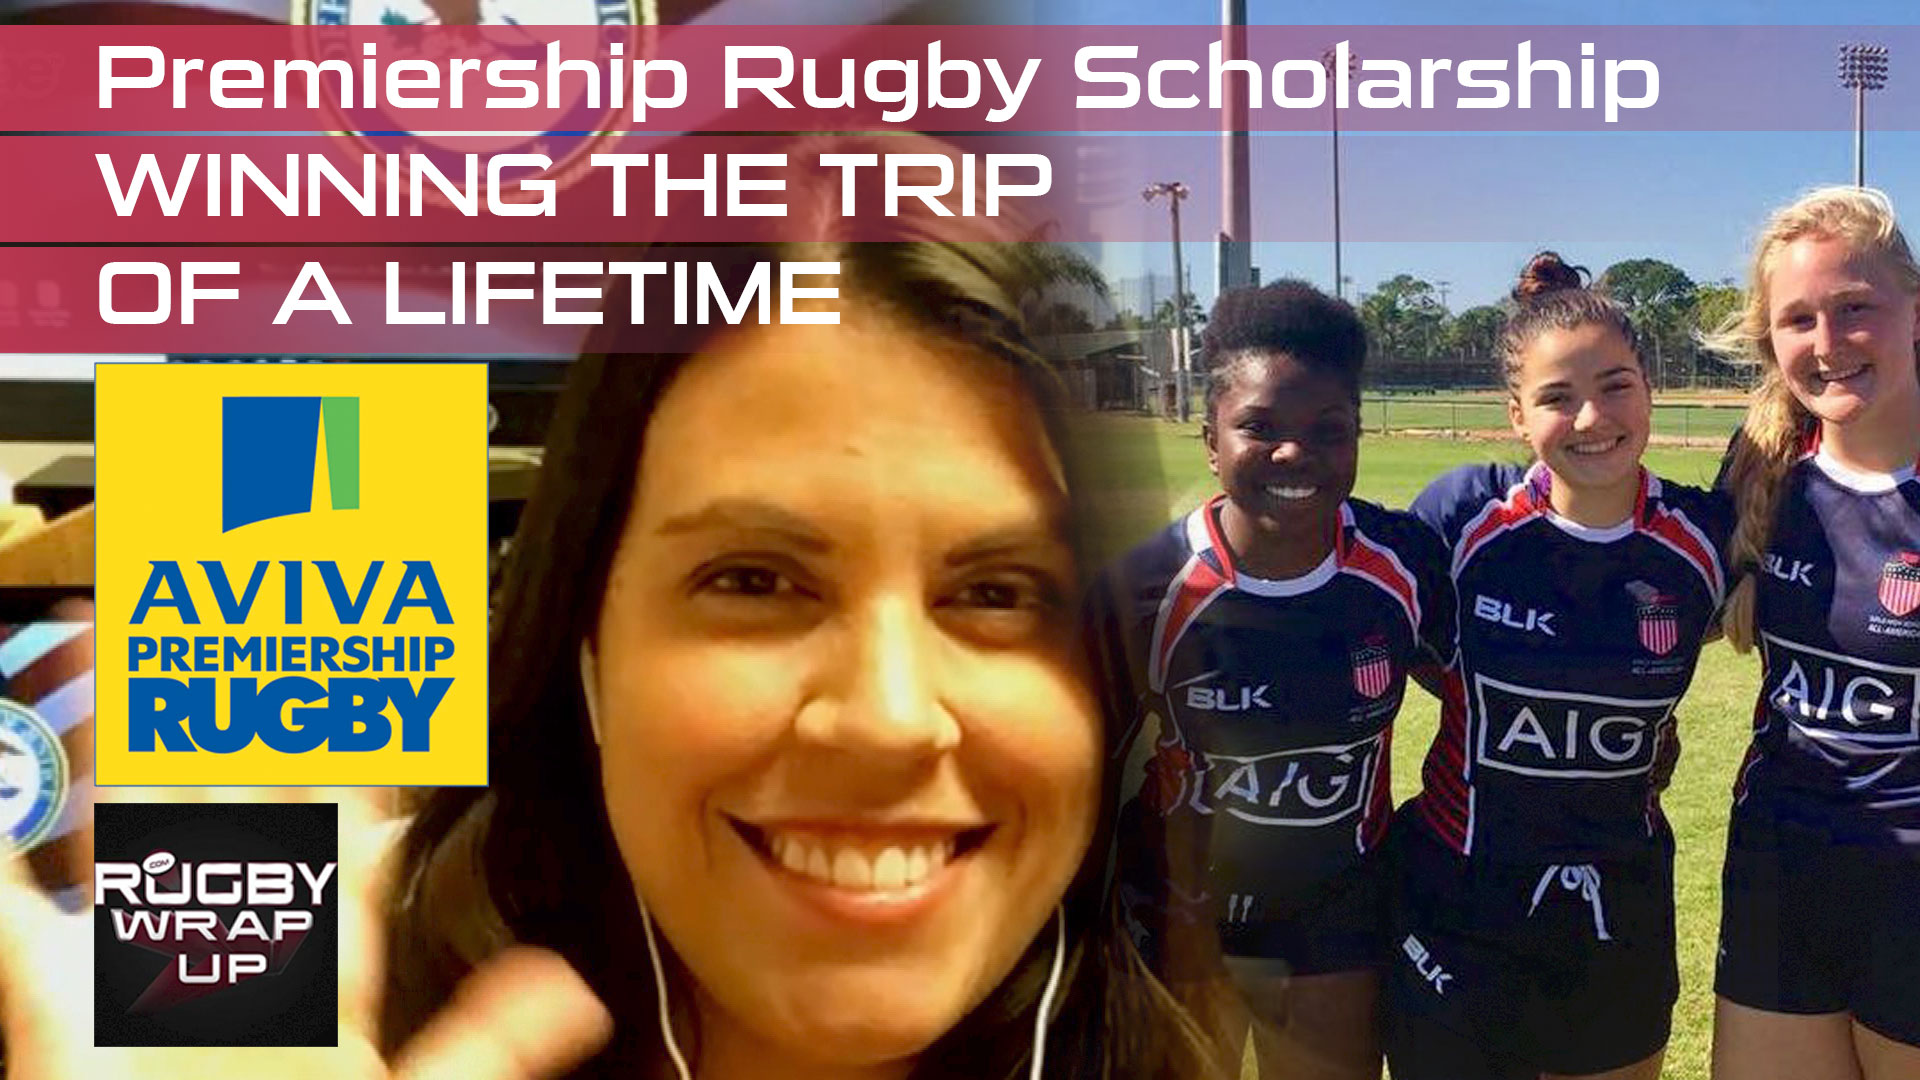 Rugby TV/Podcast: Lucky Premiership Rugby & Friends of the British Council, American Series Scholarship Winners: Katherine Aversano & Ubaida Ahmed